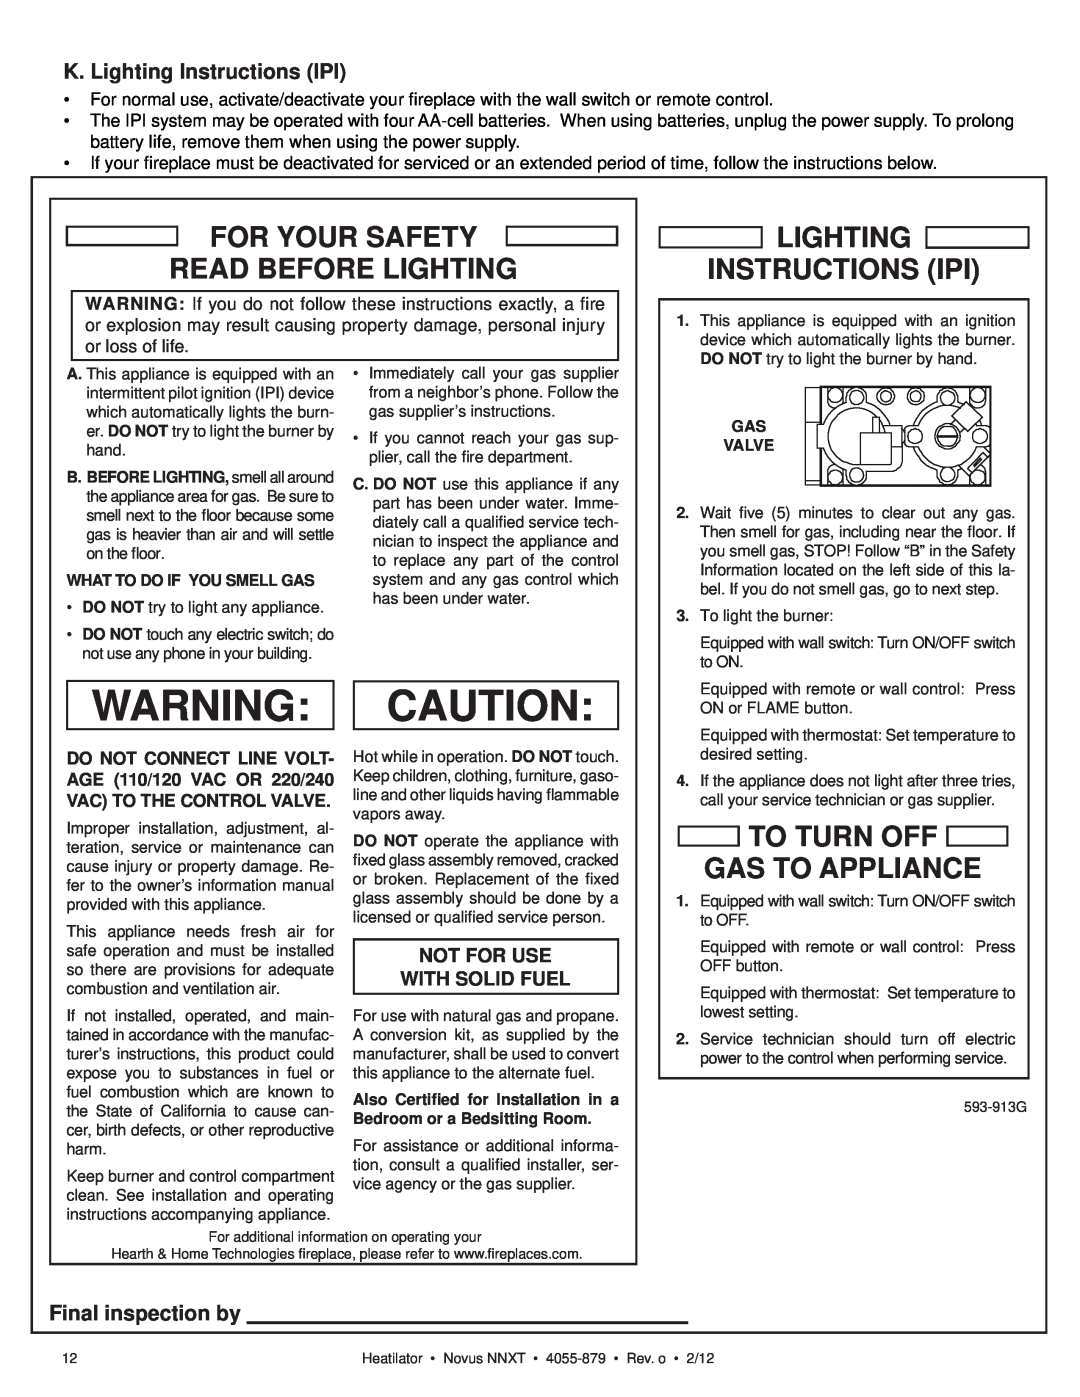 Heatiator NNXT3933IL, NNXT4236I K. Lighting Instructions IPI, Final inspection by, For Your Safety Read Before Lighting 